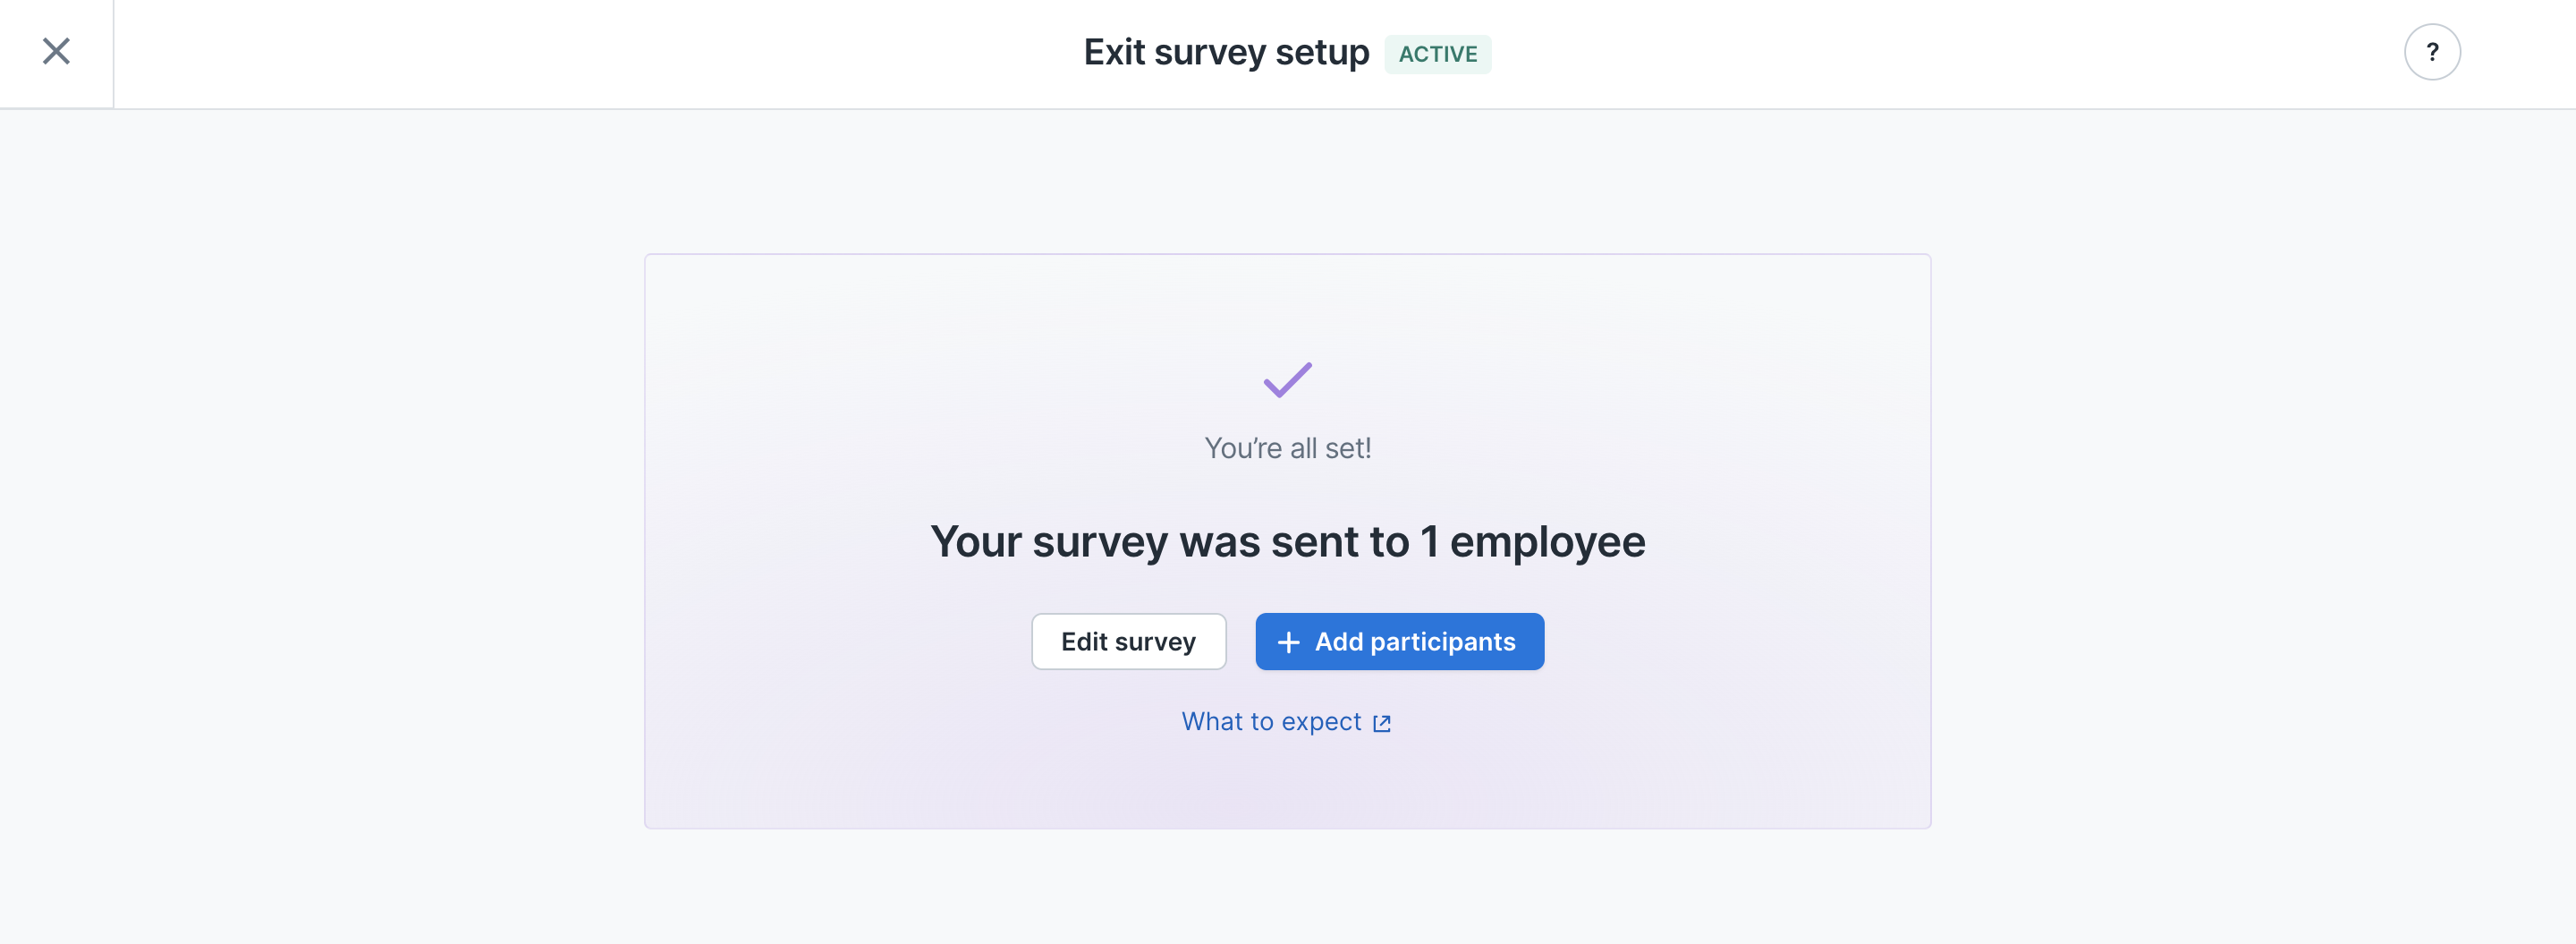 Image of Exit survey setup confirmation page where it states Your survey was sent to 1 employee